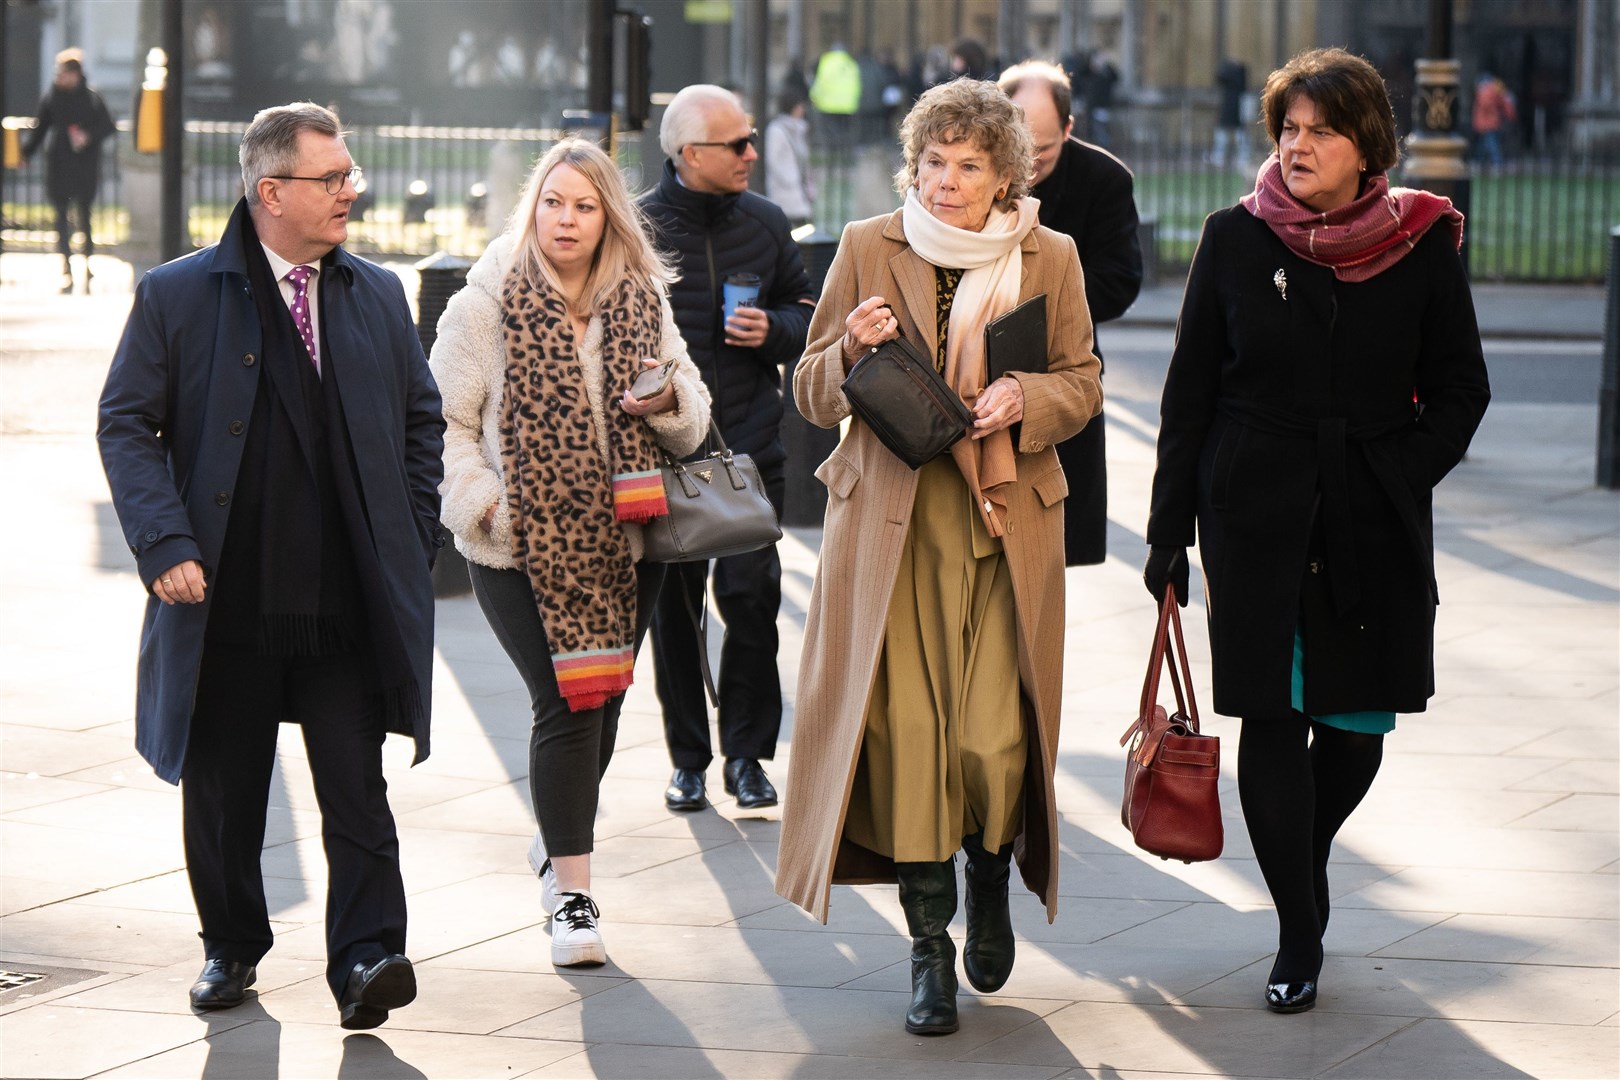 DUP leader Sir Jeffrey Donaldson, left, Ben Habib, back left, Baroness Kate Hoey, second right, and former first minister Dame Arlene Foster, right, outside the UK Supreme Court in London (Aaron Chown/PA)